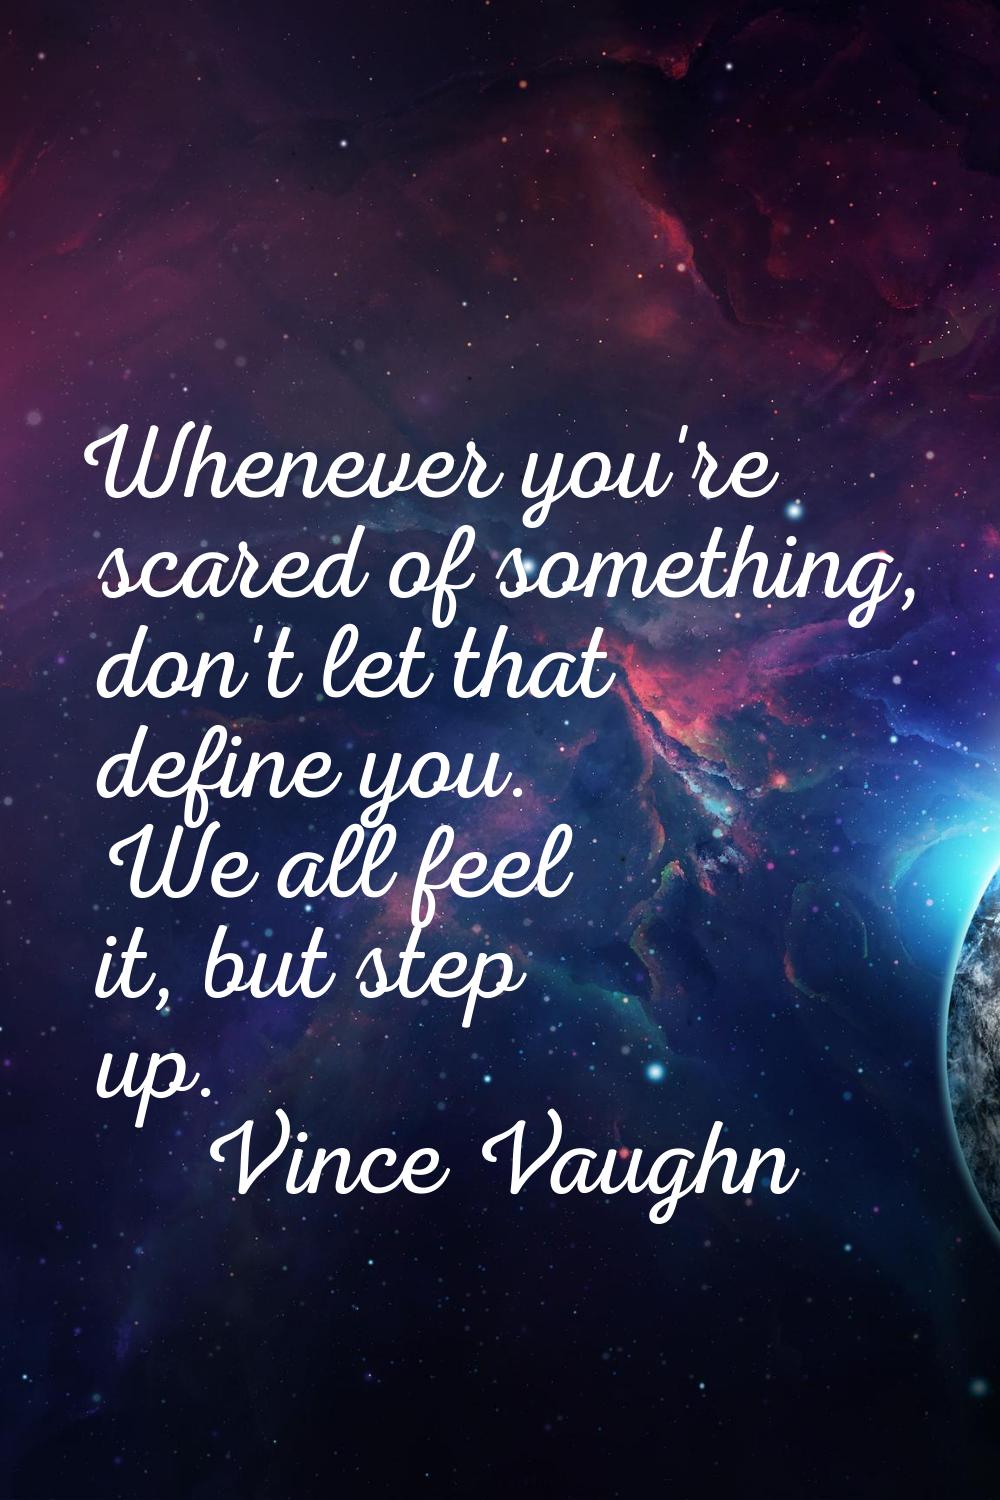 Whenever you're scared of something, don't let that define you. We all feel it, but step up.